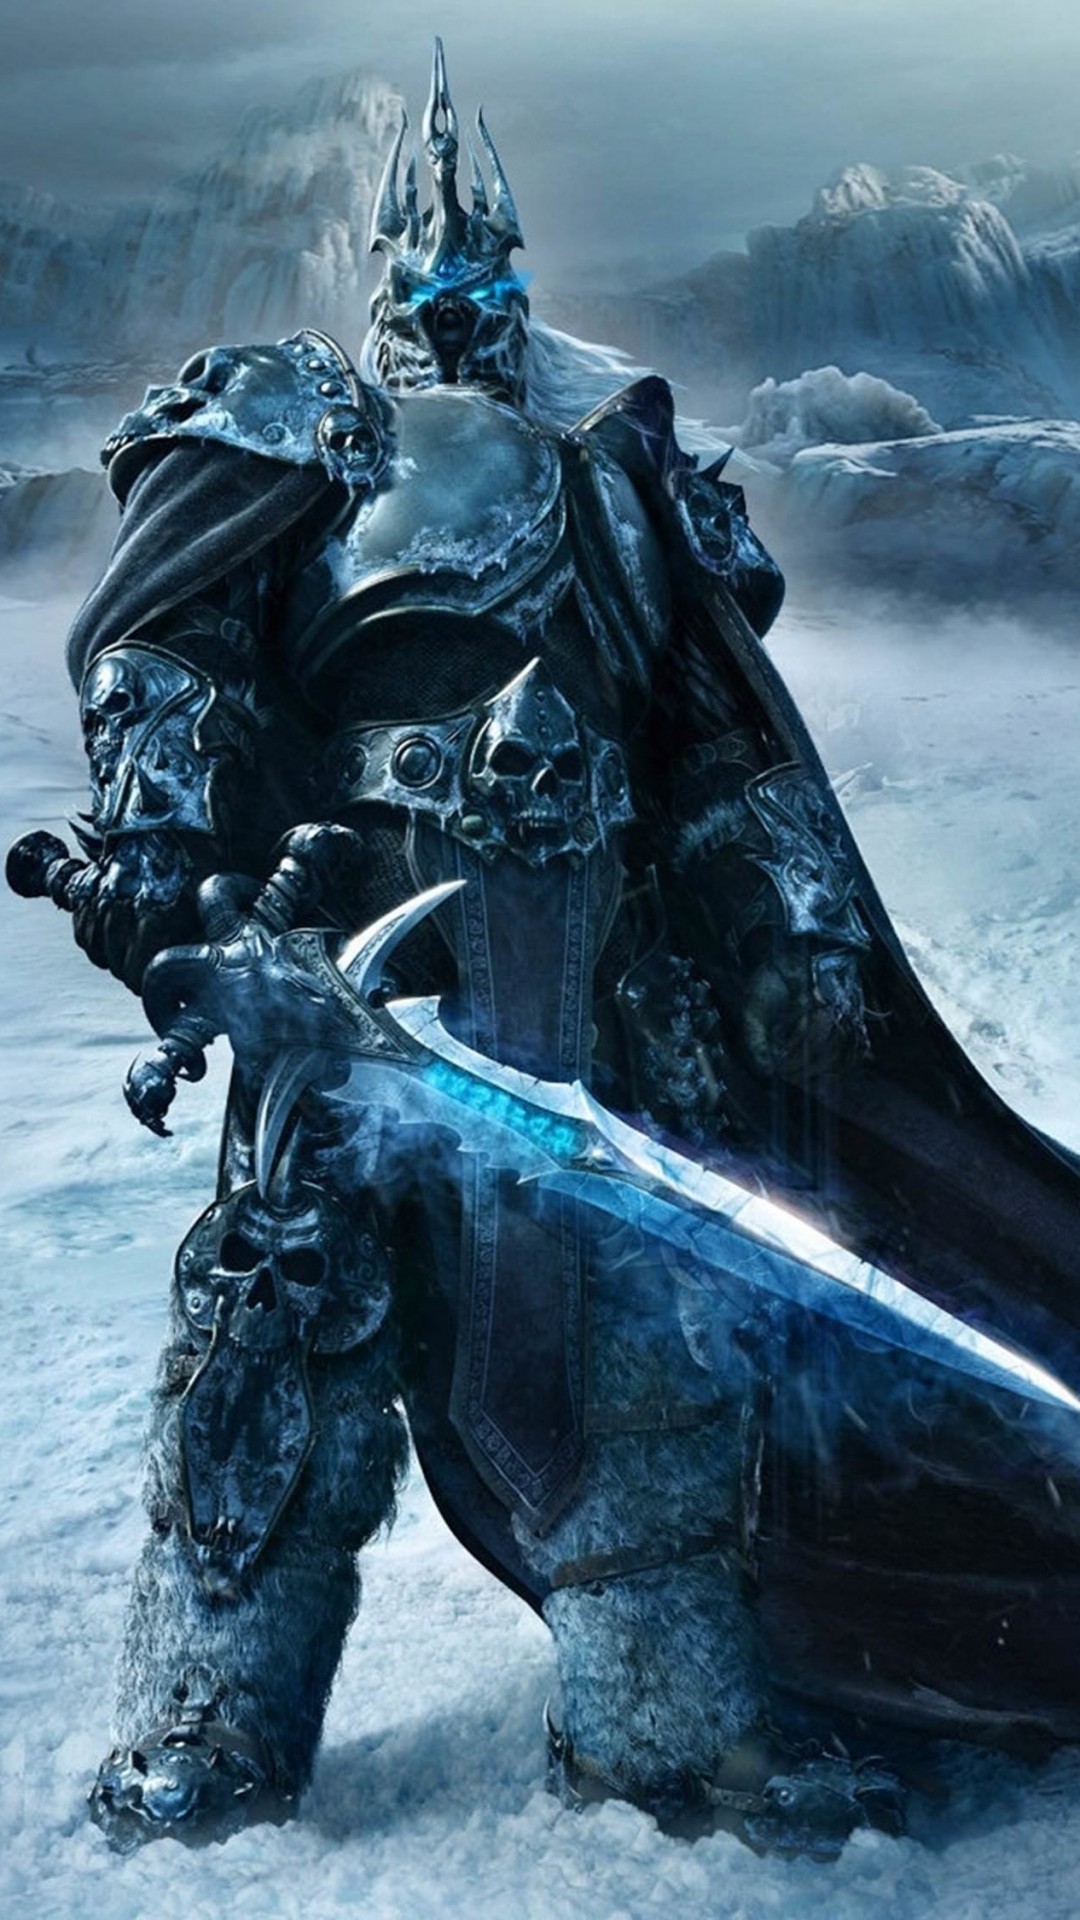 World of Warcraft: Wrath of the Lich King Wallpaper for HTC One